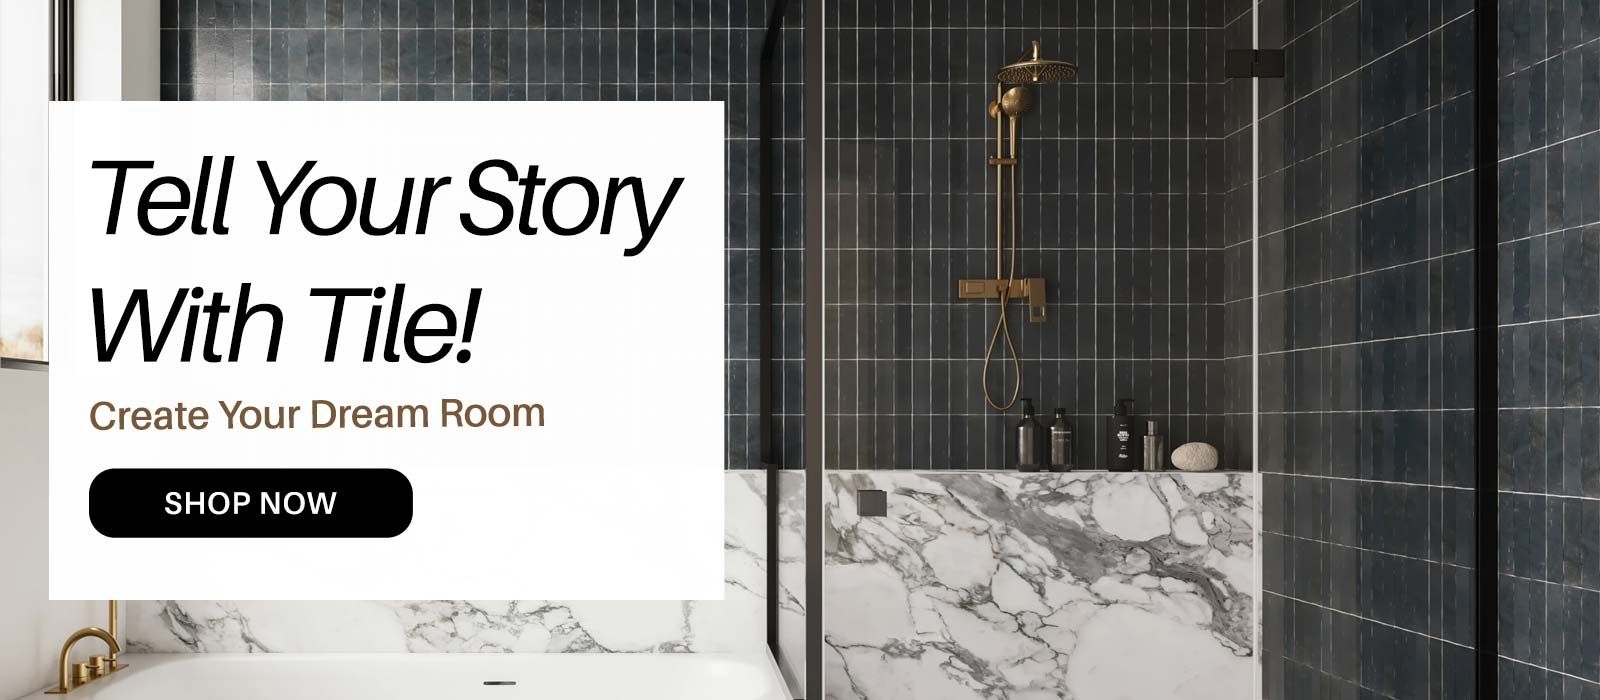 Tell Your Story With Tile! Create Your Dream Room. Shop Tile.